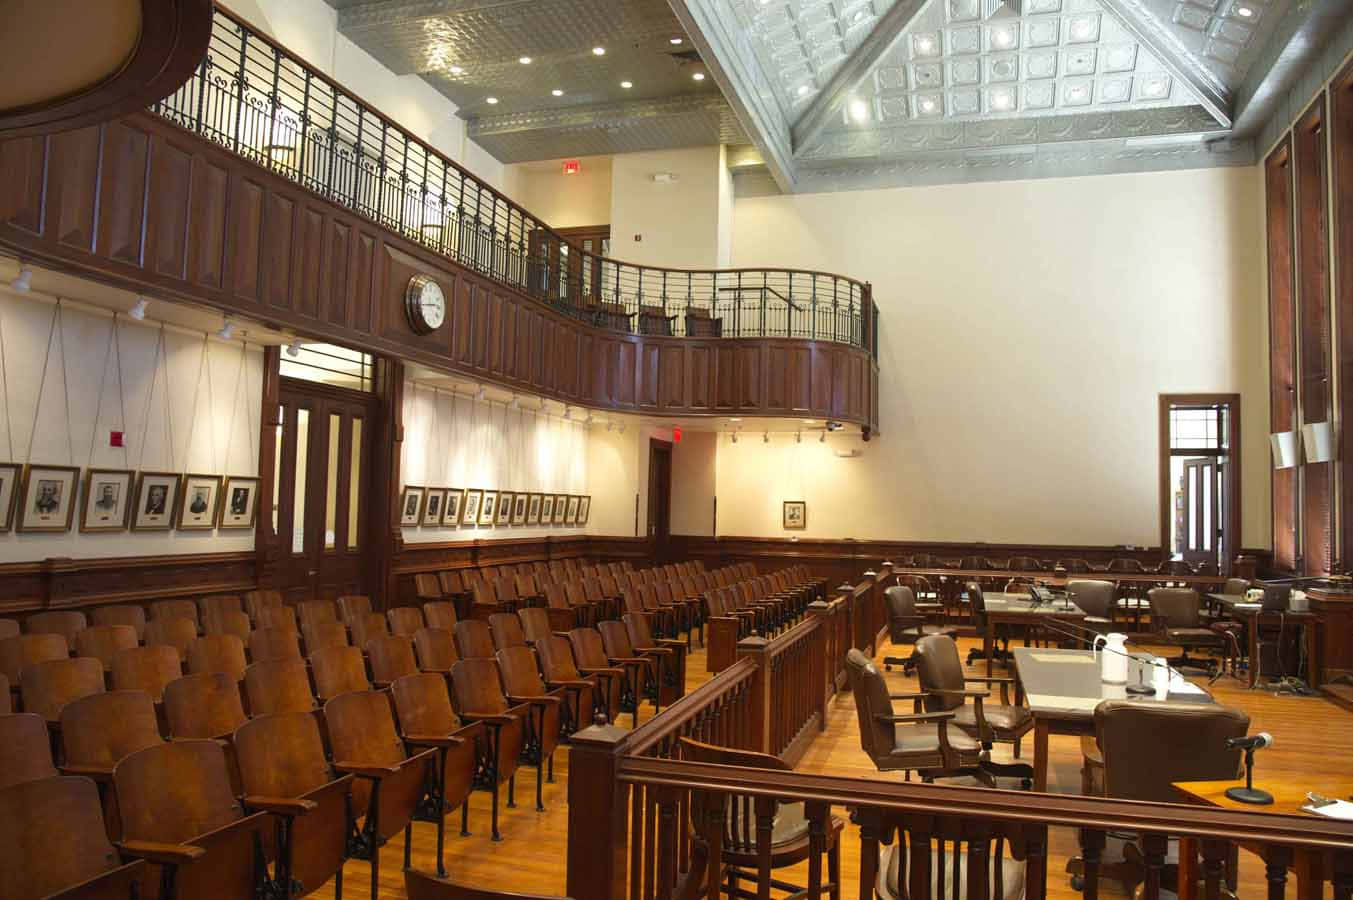 A view of the court room, where justice is served